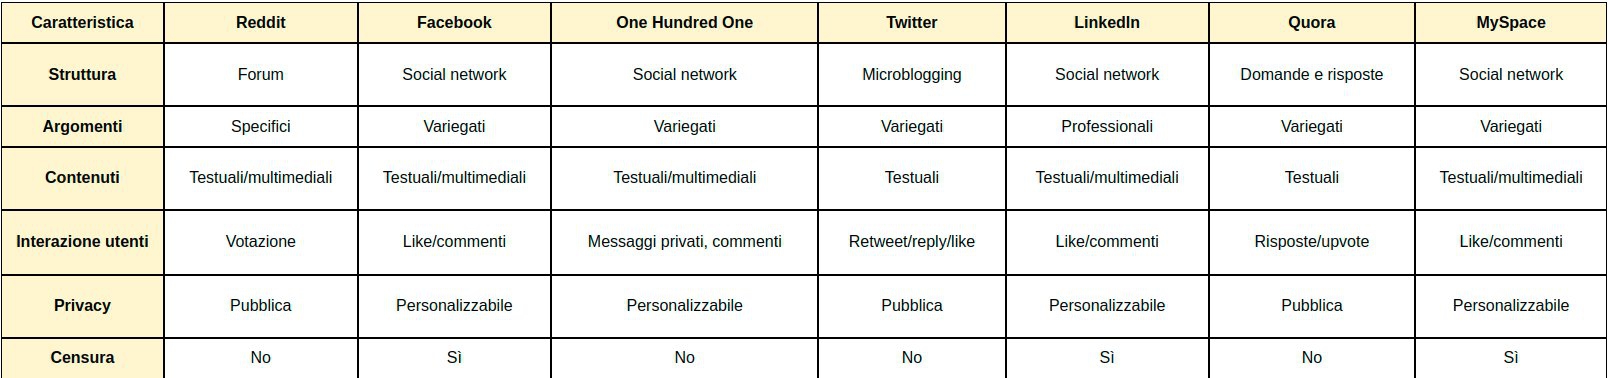 ChatGPT mette a confronto i social network